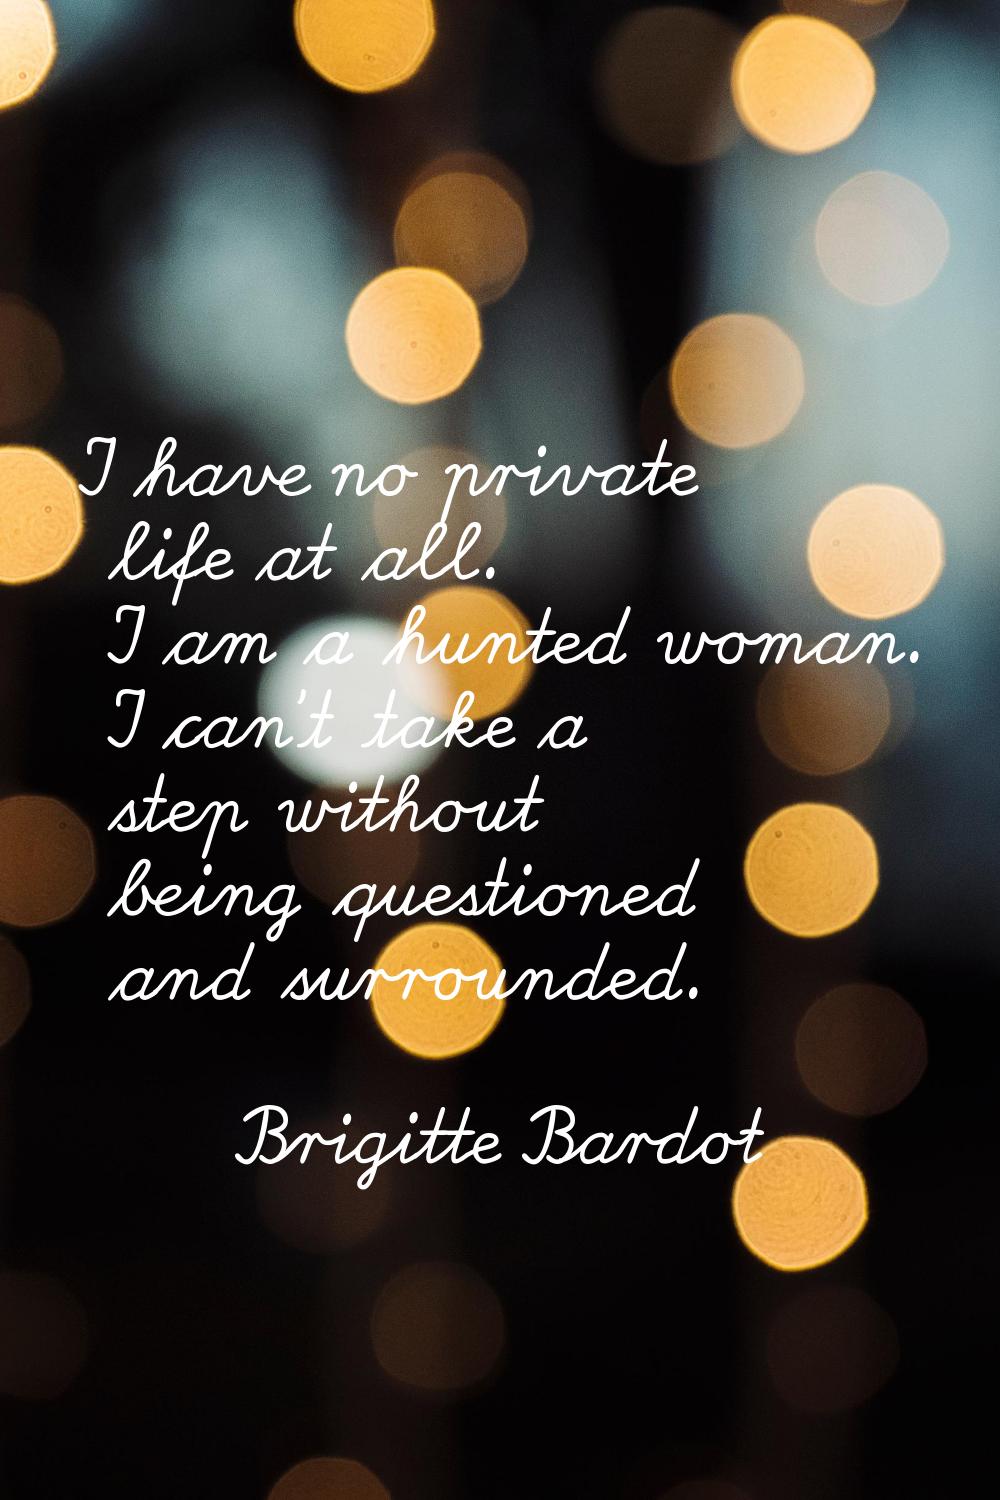 I have no private life at all. I am a hunted woman. I can't take a step without being questioned an